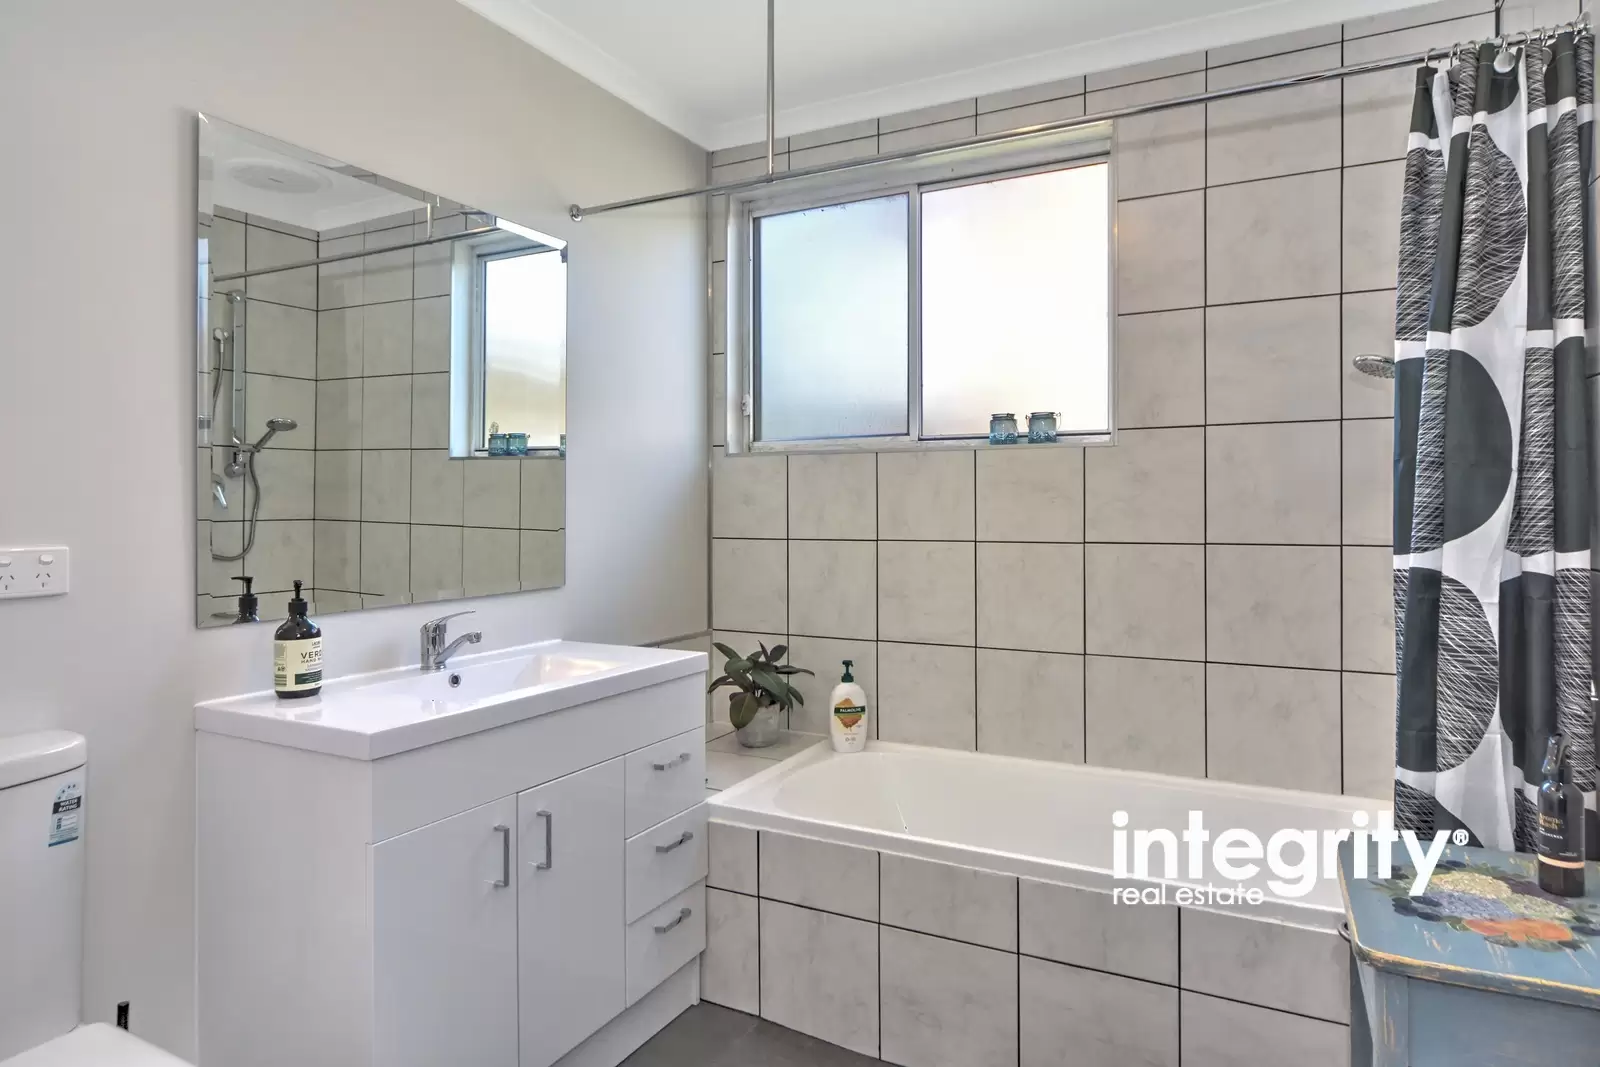 53 Comarong Street, Greenwell Point Sold by Integrity Real Estate - image 7